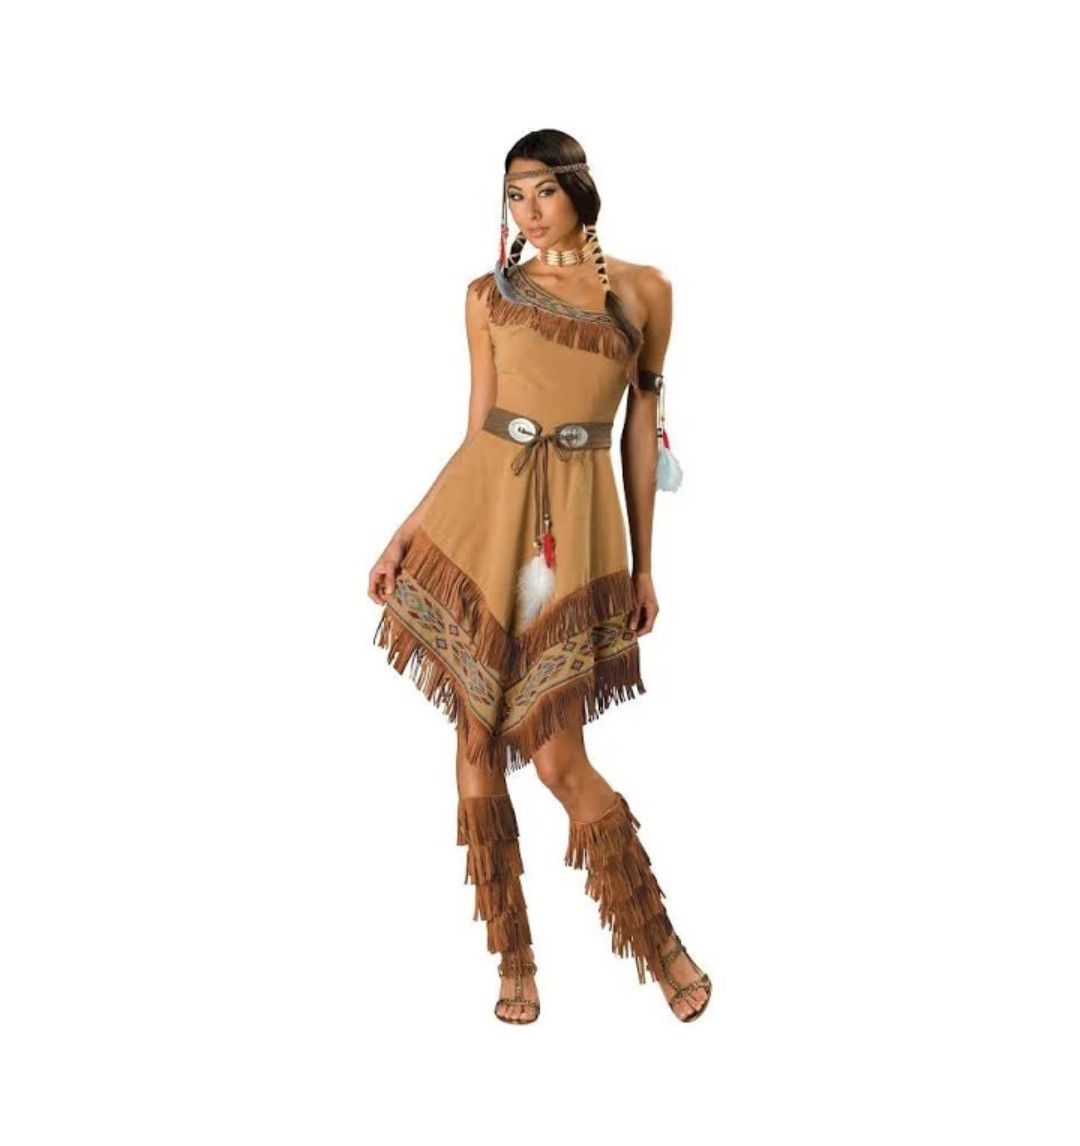 XL size Indian Costume